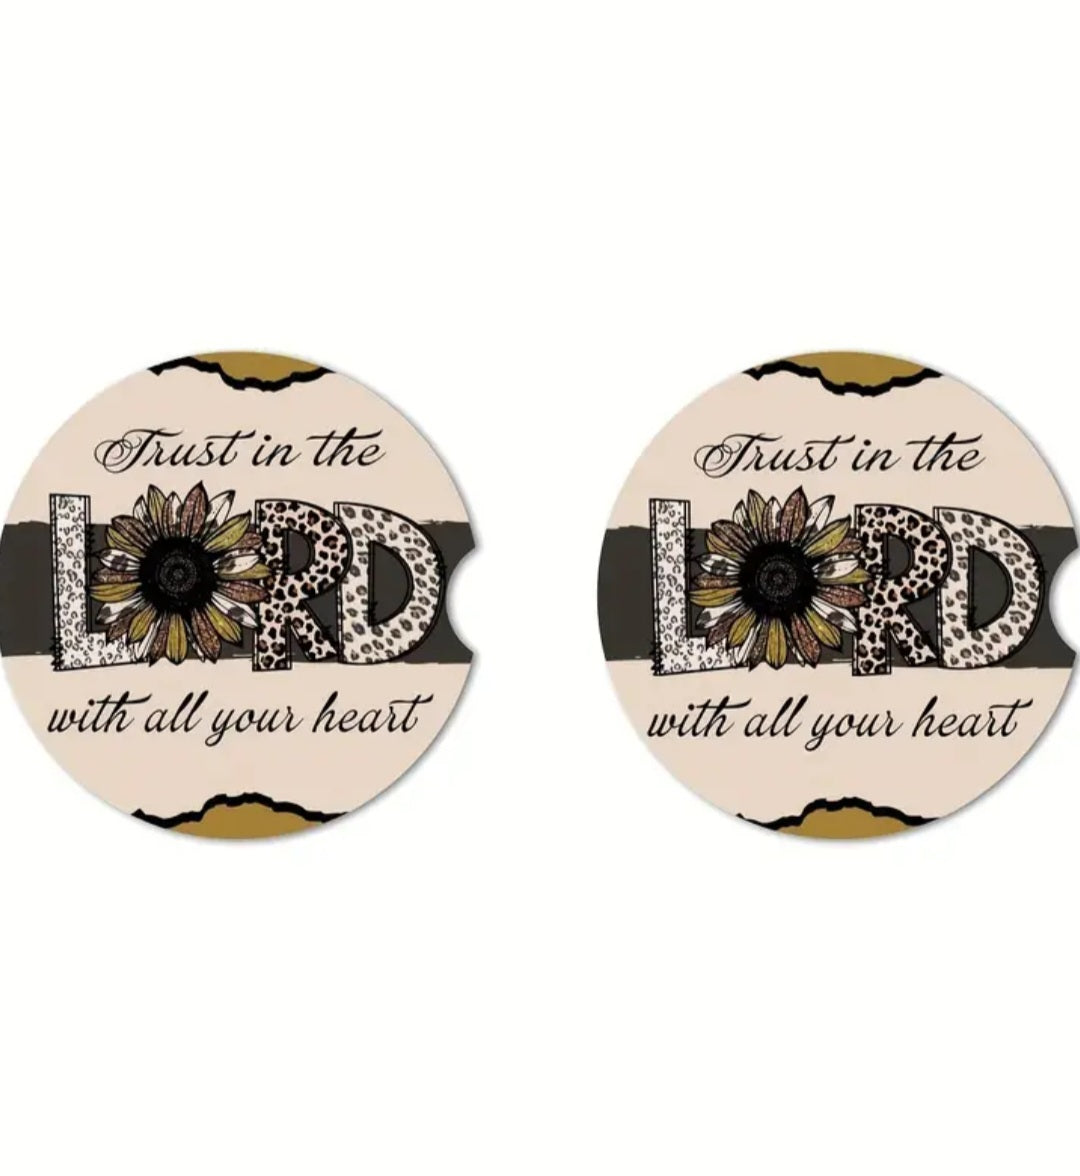 Car Cup Holder Coasters - Trust In The Lord